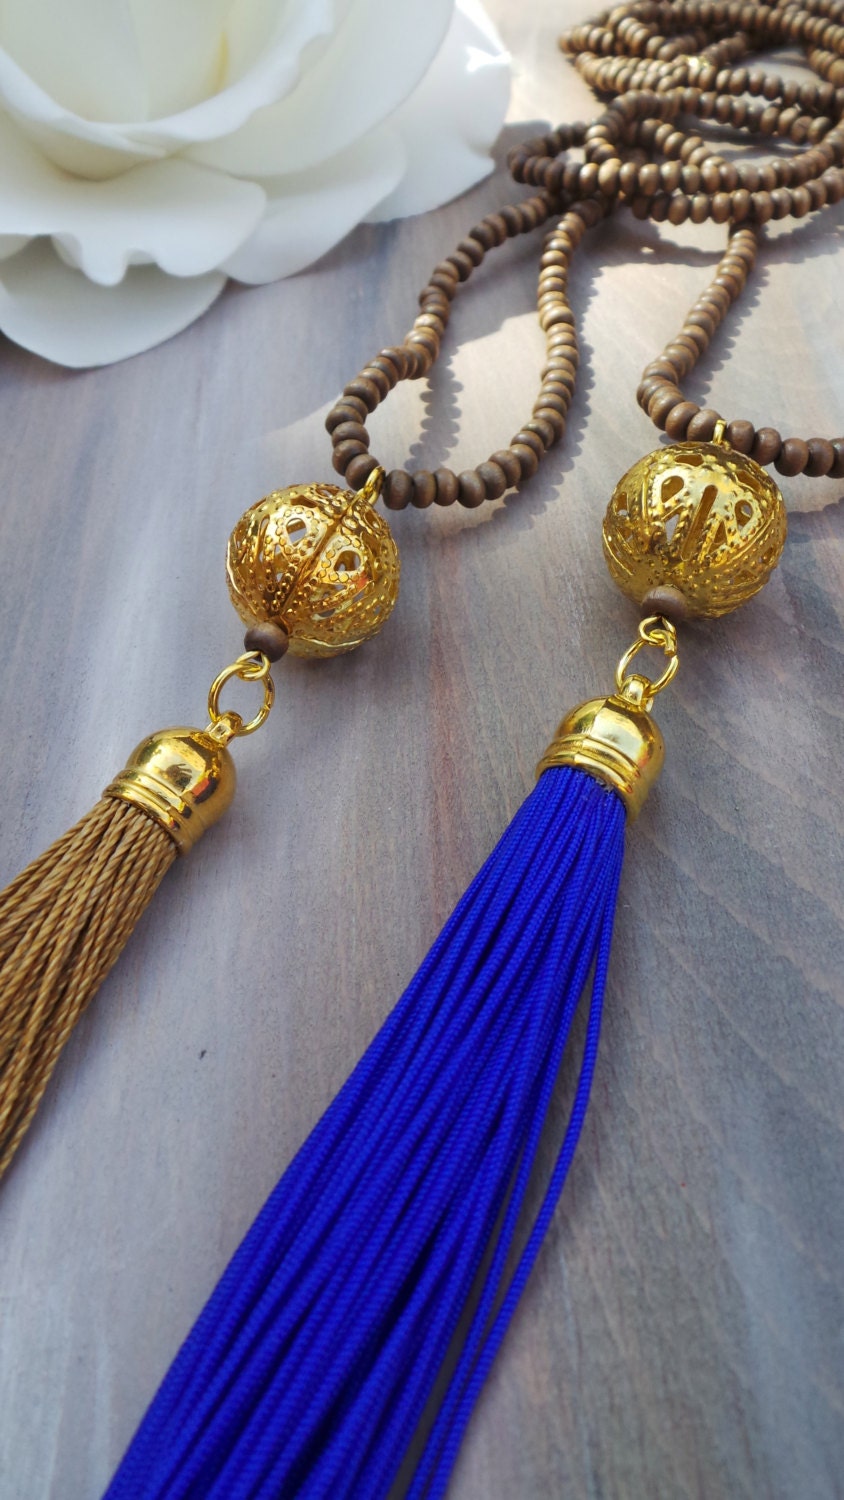 Wood bead tassel necklace. Brown tassel necklace with gold